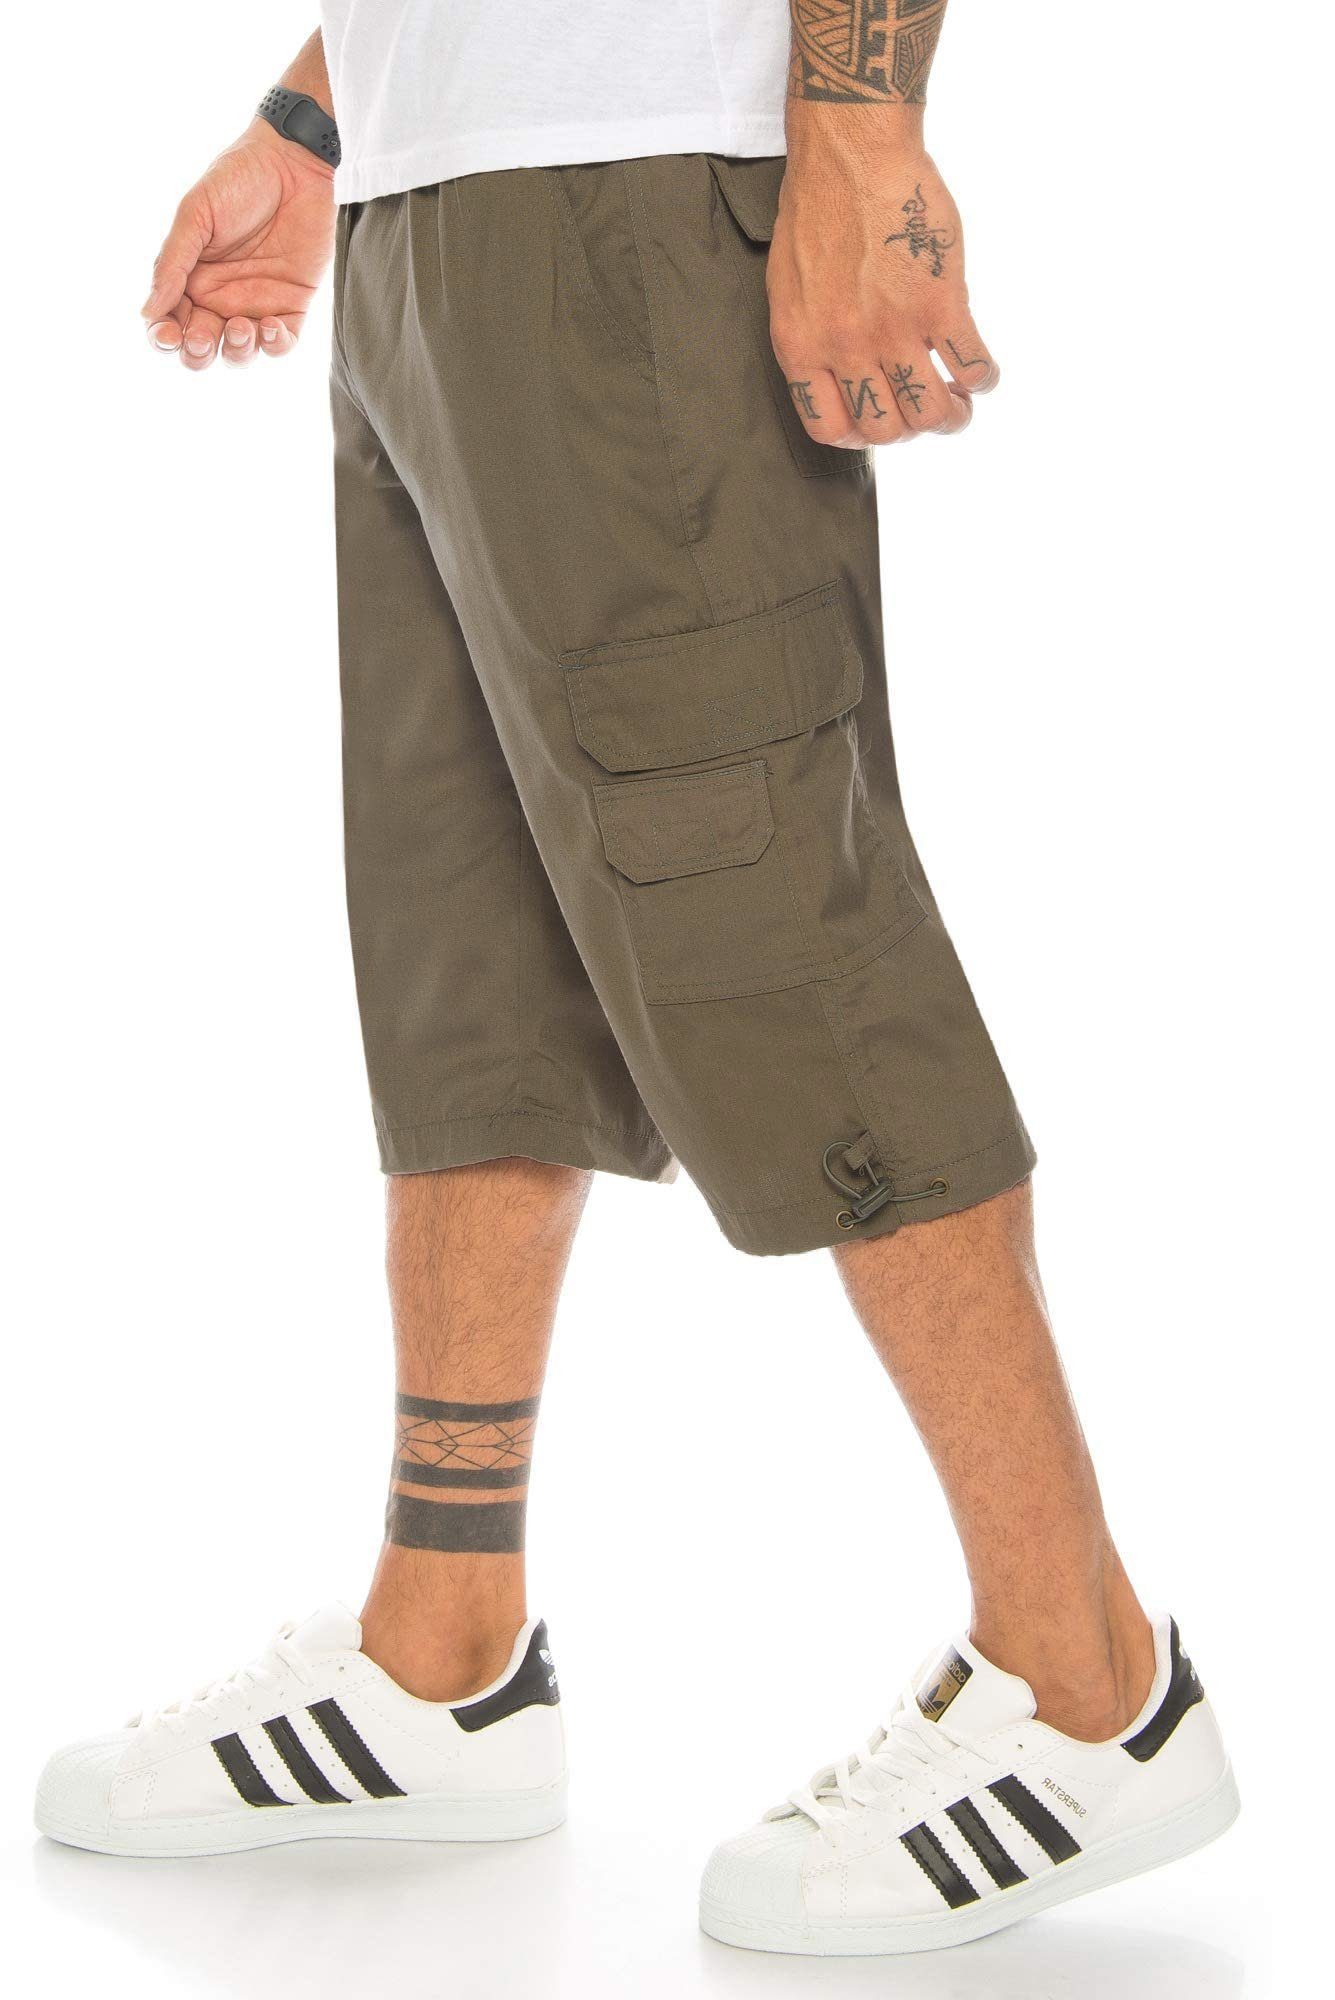 Kendindza Collection Cargoshorts Hose kurze Gummibund Hose Taschen, Cargoshorts 3/4 Herren, Herren Herren Cargo Olive Hose Bermudas Kurze Herren Herren Stretch Sommer